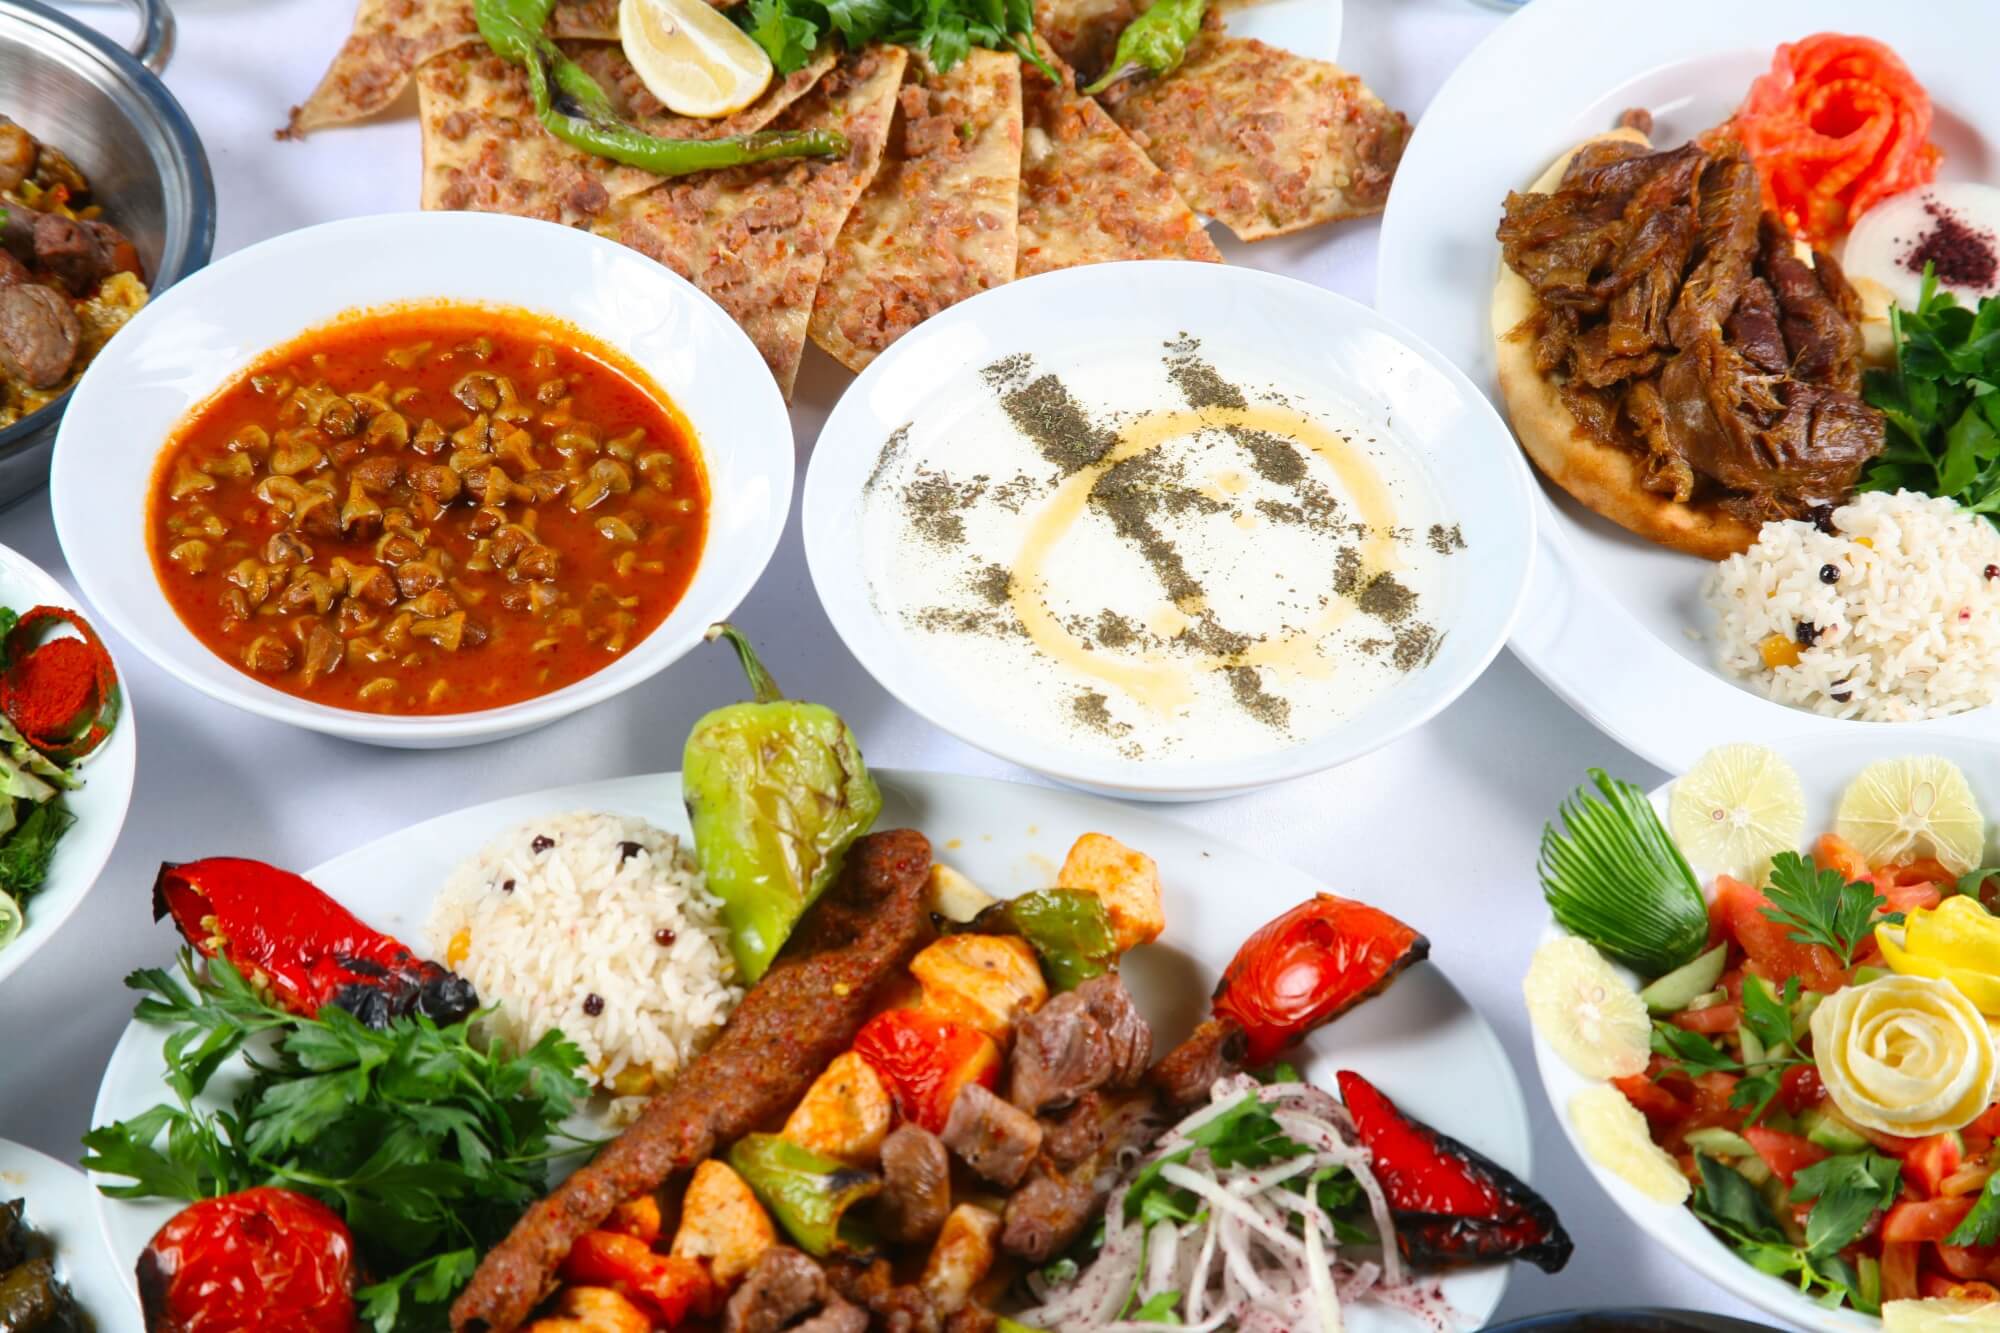 Give the Turkish mezes a try; you will not regret it!